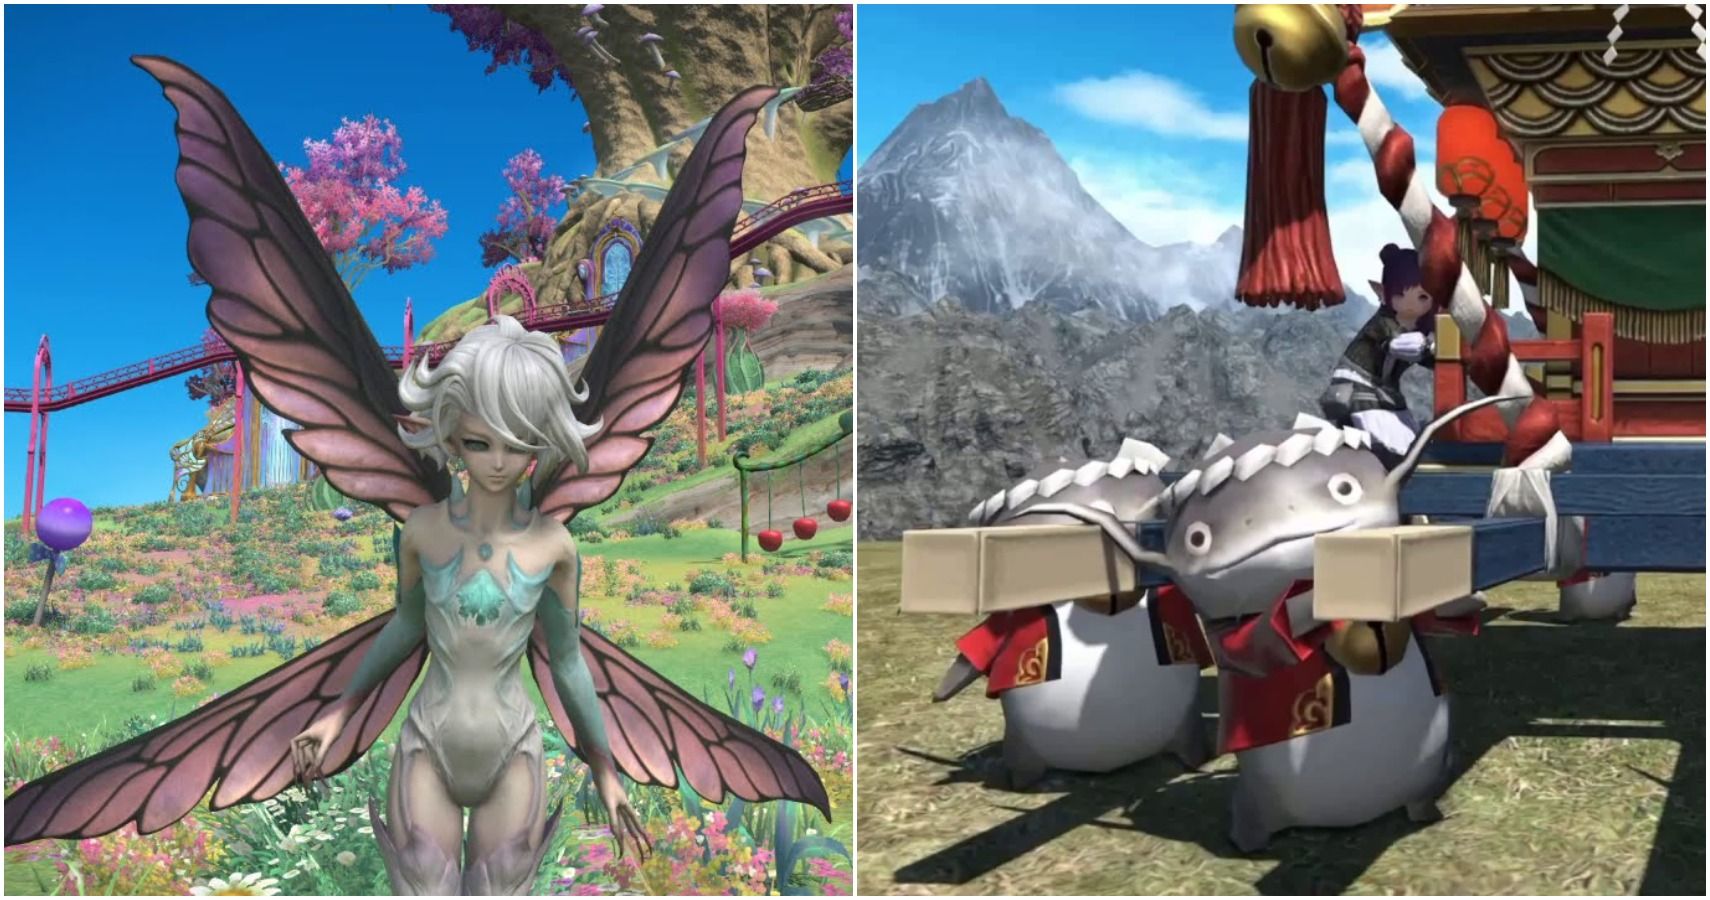 Final Fantasy Xiv: 5 Beast Tribes That Are Cool (& 5 Worth Skipping)